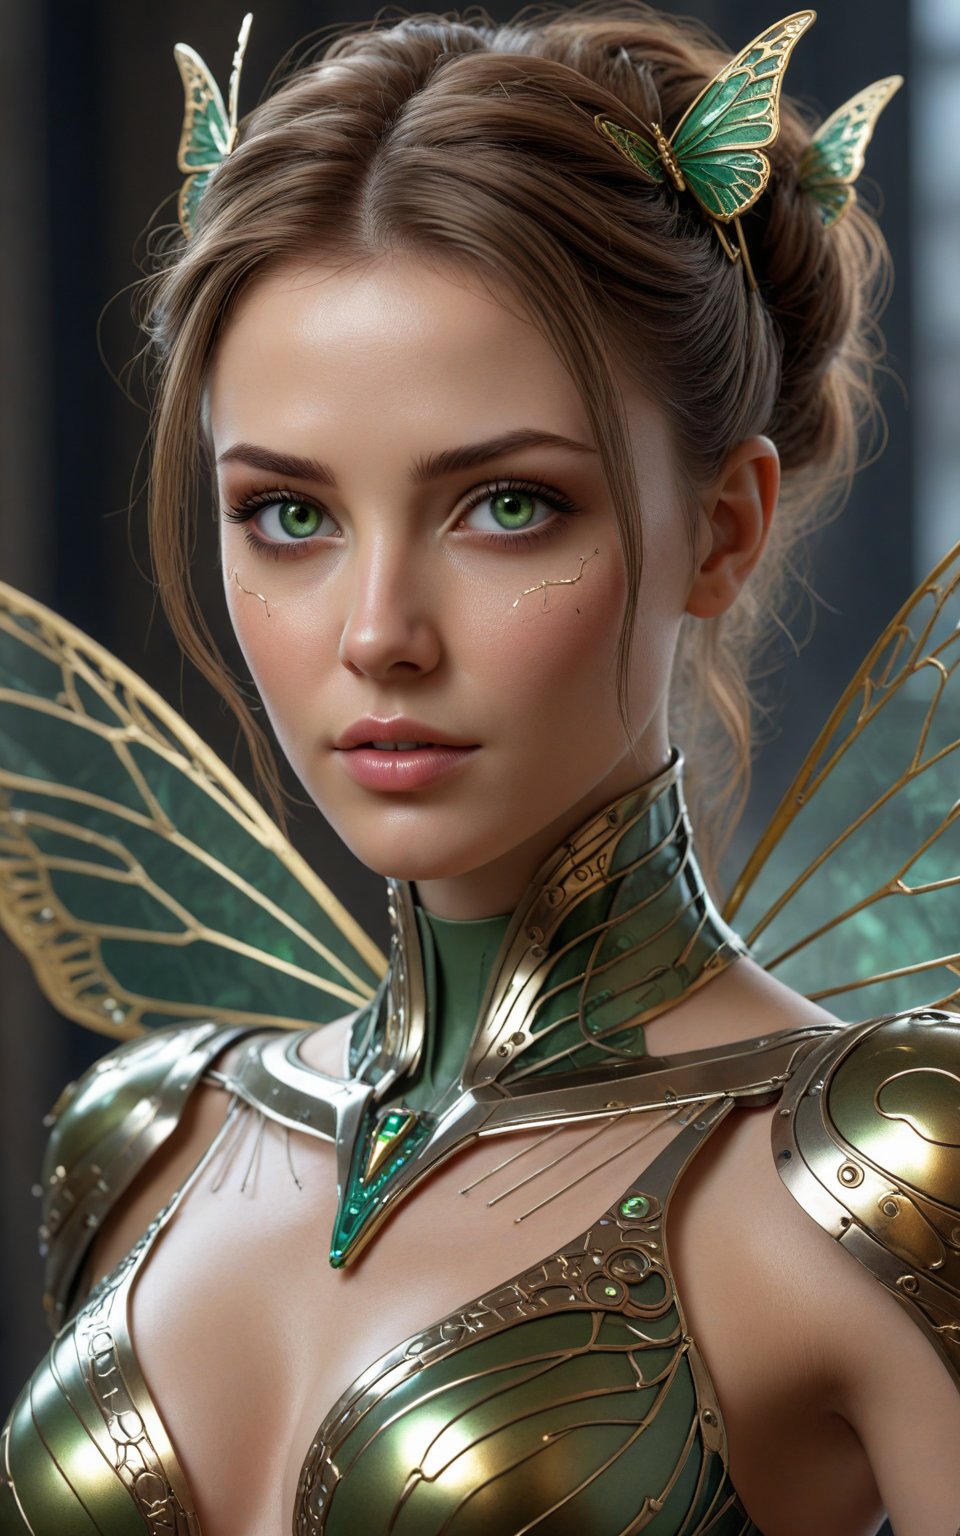 (best quality,8K,highres,masterpiece), ultra-detailed, (portrait of a stunning beauty woman, a beautiful cyborg with brown hair and sharp green eyes), an enchanting portrait capturing the beauty of a cyborg woman with striking brown hair and sharp green eyes. Her features are intricate and elegant, with every detail meticulously rendered to showcase her majestic presence. The portrait is captured through digital photography, allowing for the highest level of detail and realism. Adorning her cyborg form are delicate gold butterfly filigree accents, adding a touch of ethereal beauty to her appearance. Translucent fairy wings extend from her back, hinting at her otherworldly nature and grace. Surrounding her is a shattered glass motif, symbolizing both her fractured humanity and her resilience. This artwork captures the juxtaposition of beauty and technology, inviting the viewer to explore the depths of her character and identity. Feel free to add your own creative touches to enhance the realism and detail of this captivating portrait.